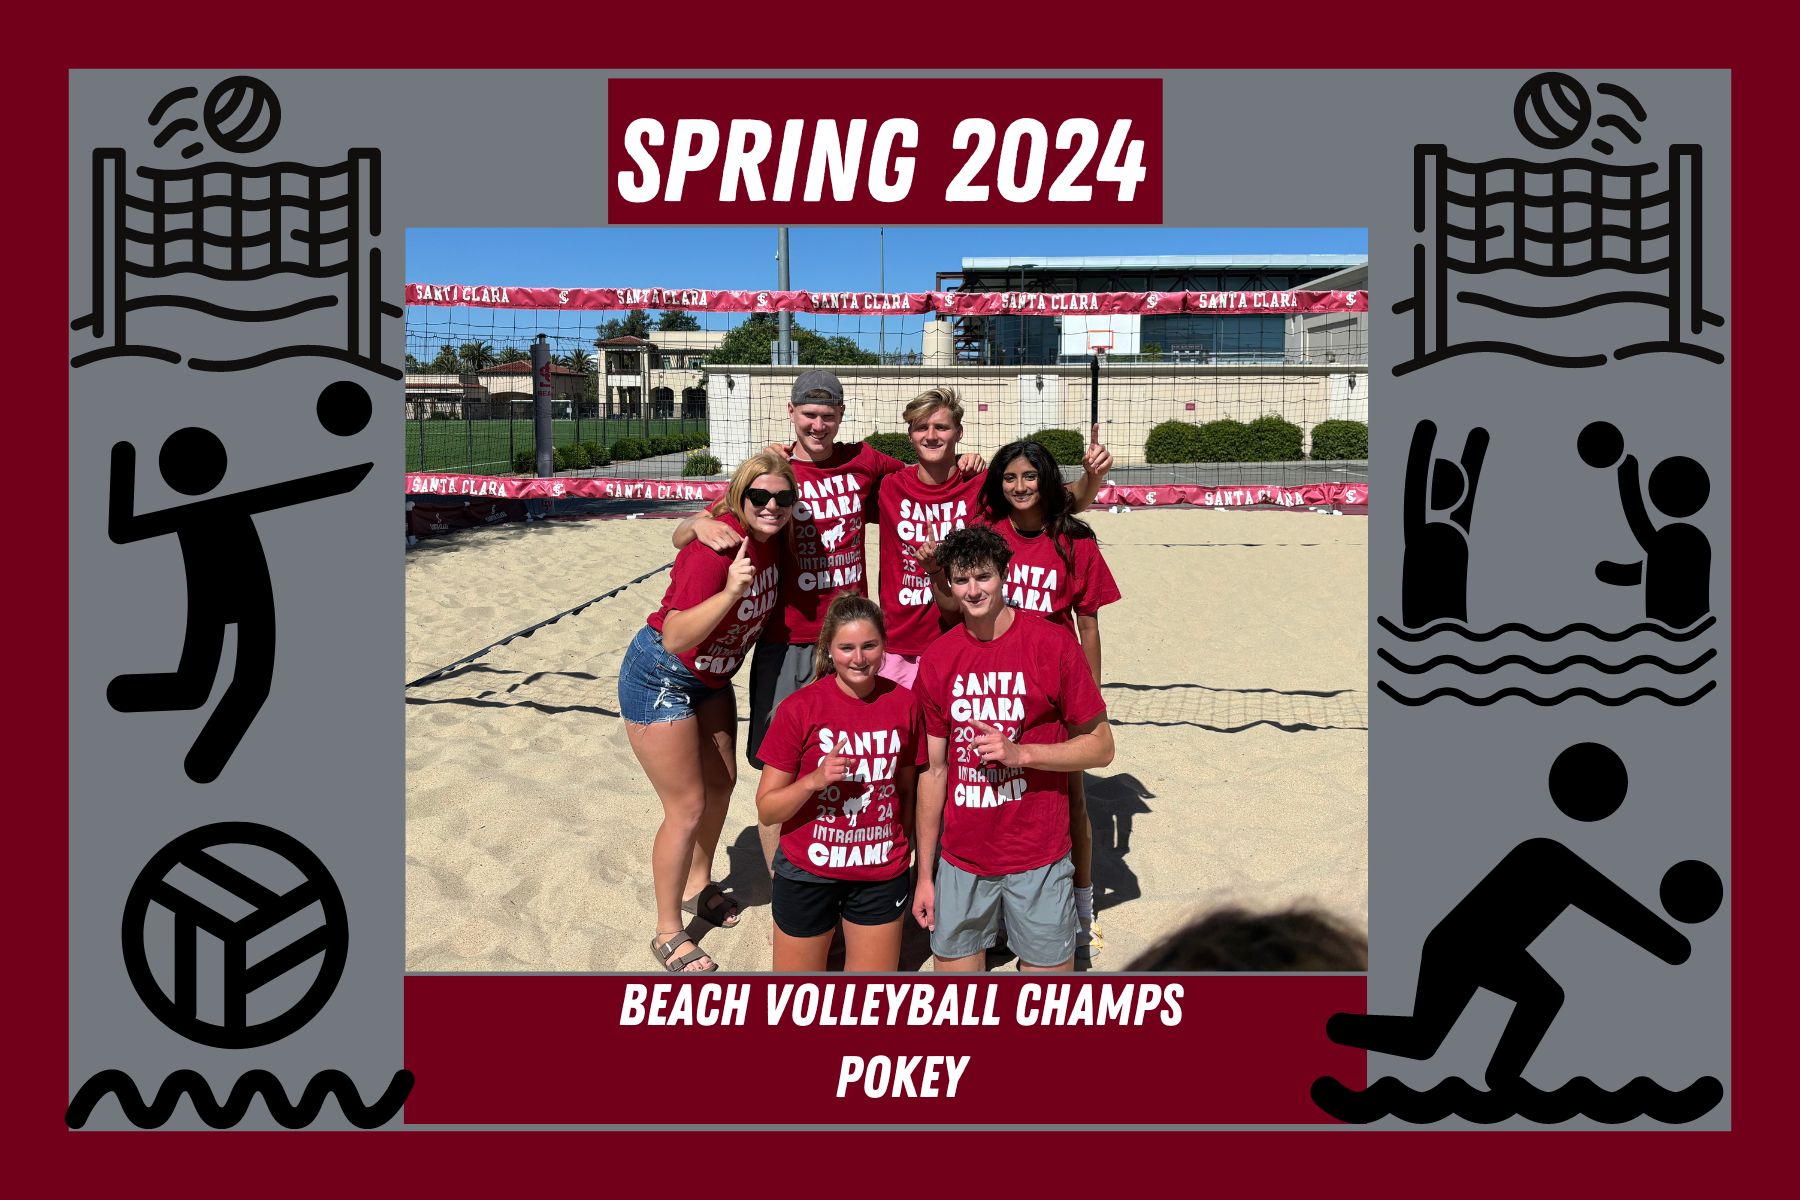 Photo of Spring 2024 Beach Volleyball Champions, Pokey, posing on the sand court with their Intramural Champ T-Shirts.